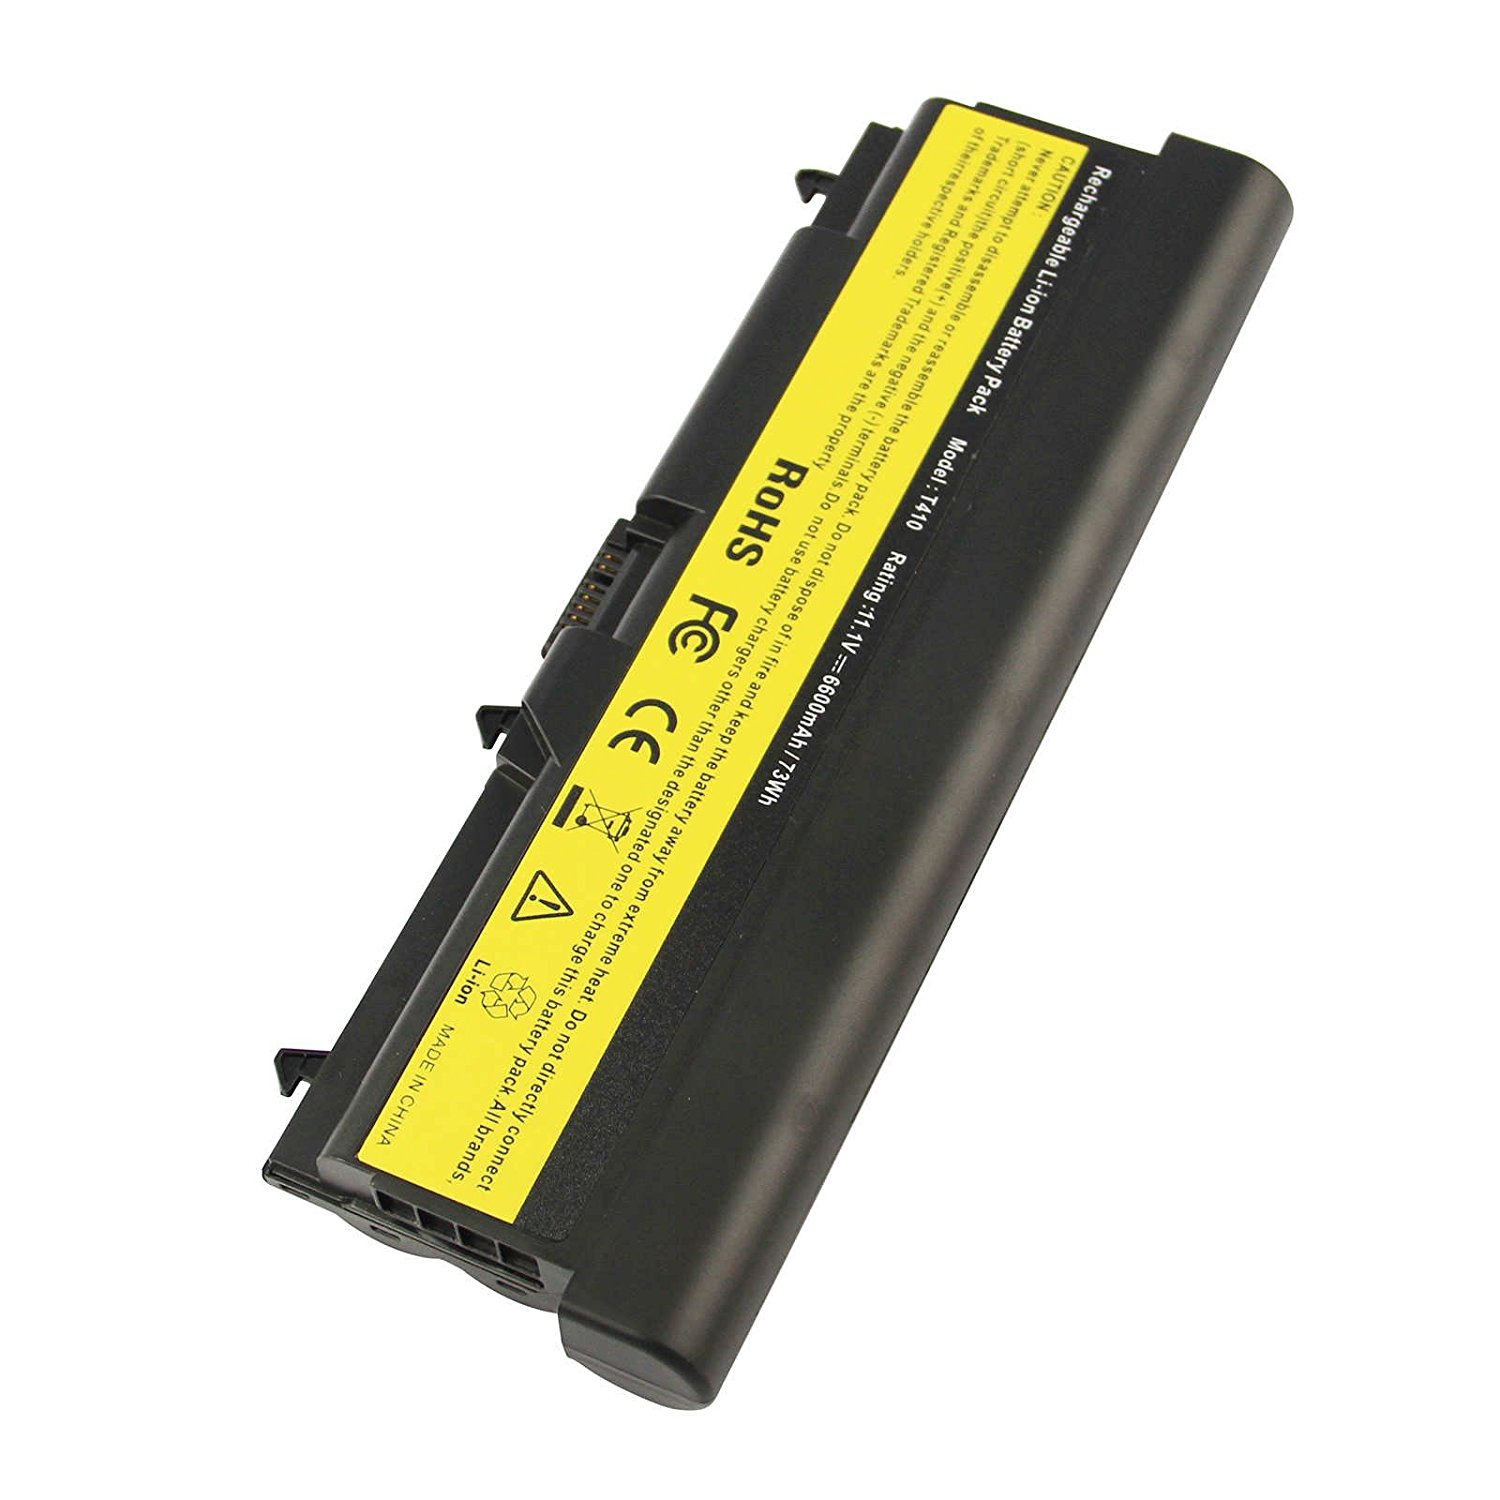 Stort univers slidbane betale sig Lenovo T430 Extended Life Replacement Battery